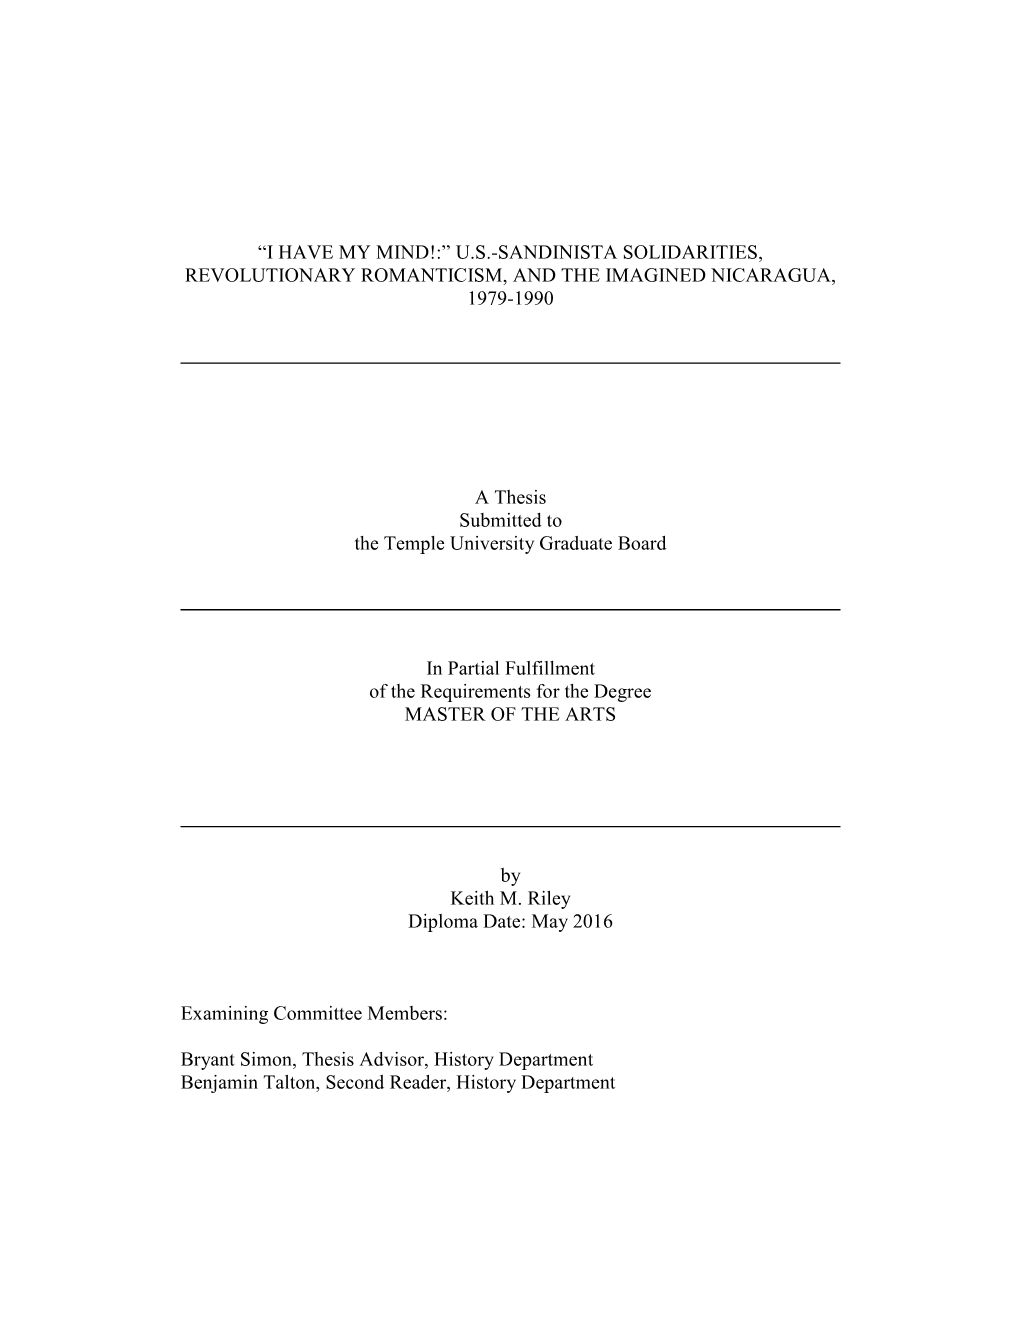 US-SANDINISTA SOLIDARITIES, REVOLUTIONARY ROMANTICISM, and the IMAGINED NICARAGUA, 1979-1990 a Thesis S